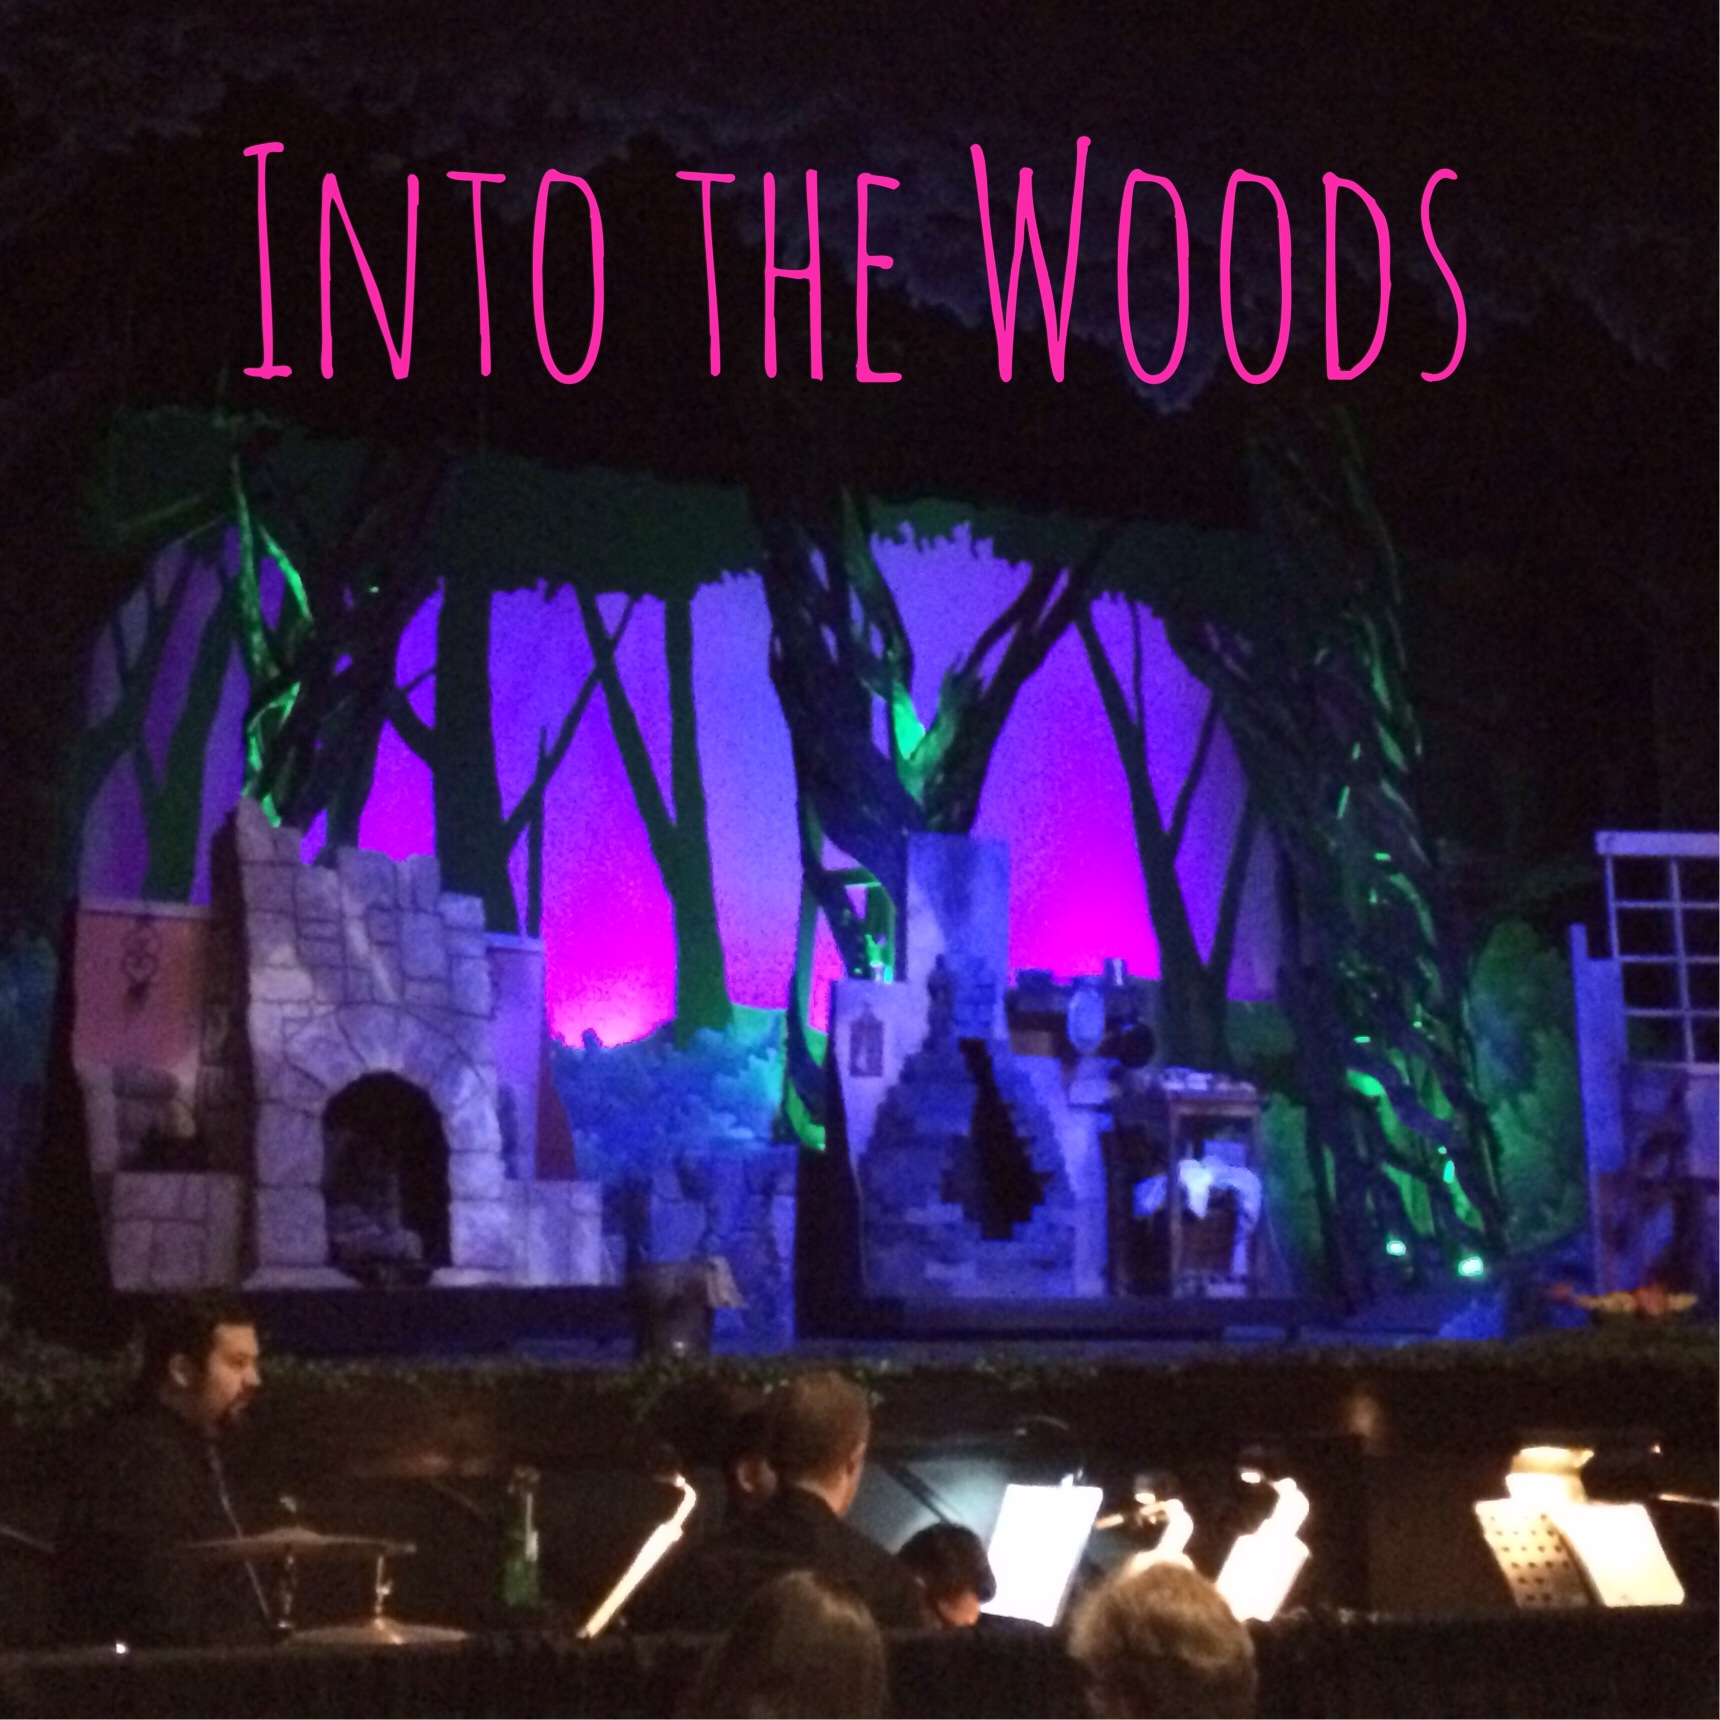 F.T. reviews "Into the Woods" at the Woodlawn Theatre | San Antonio Charter Moms